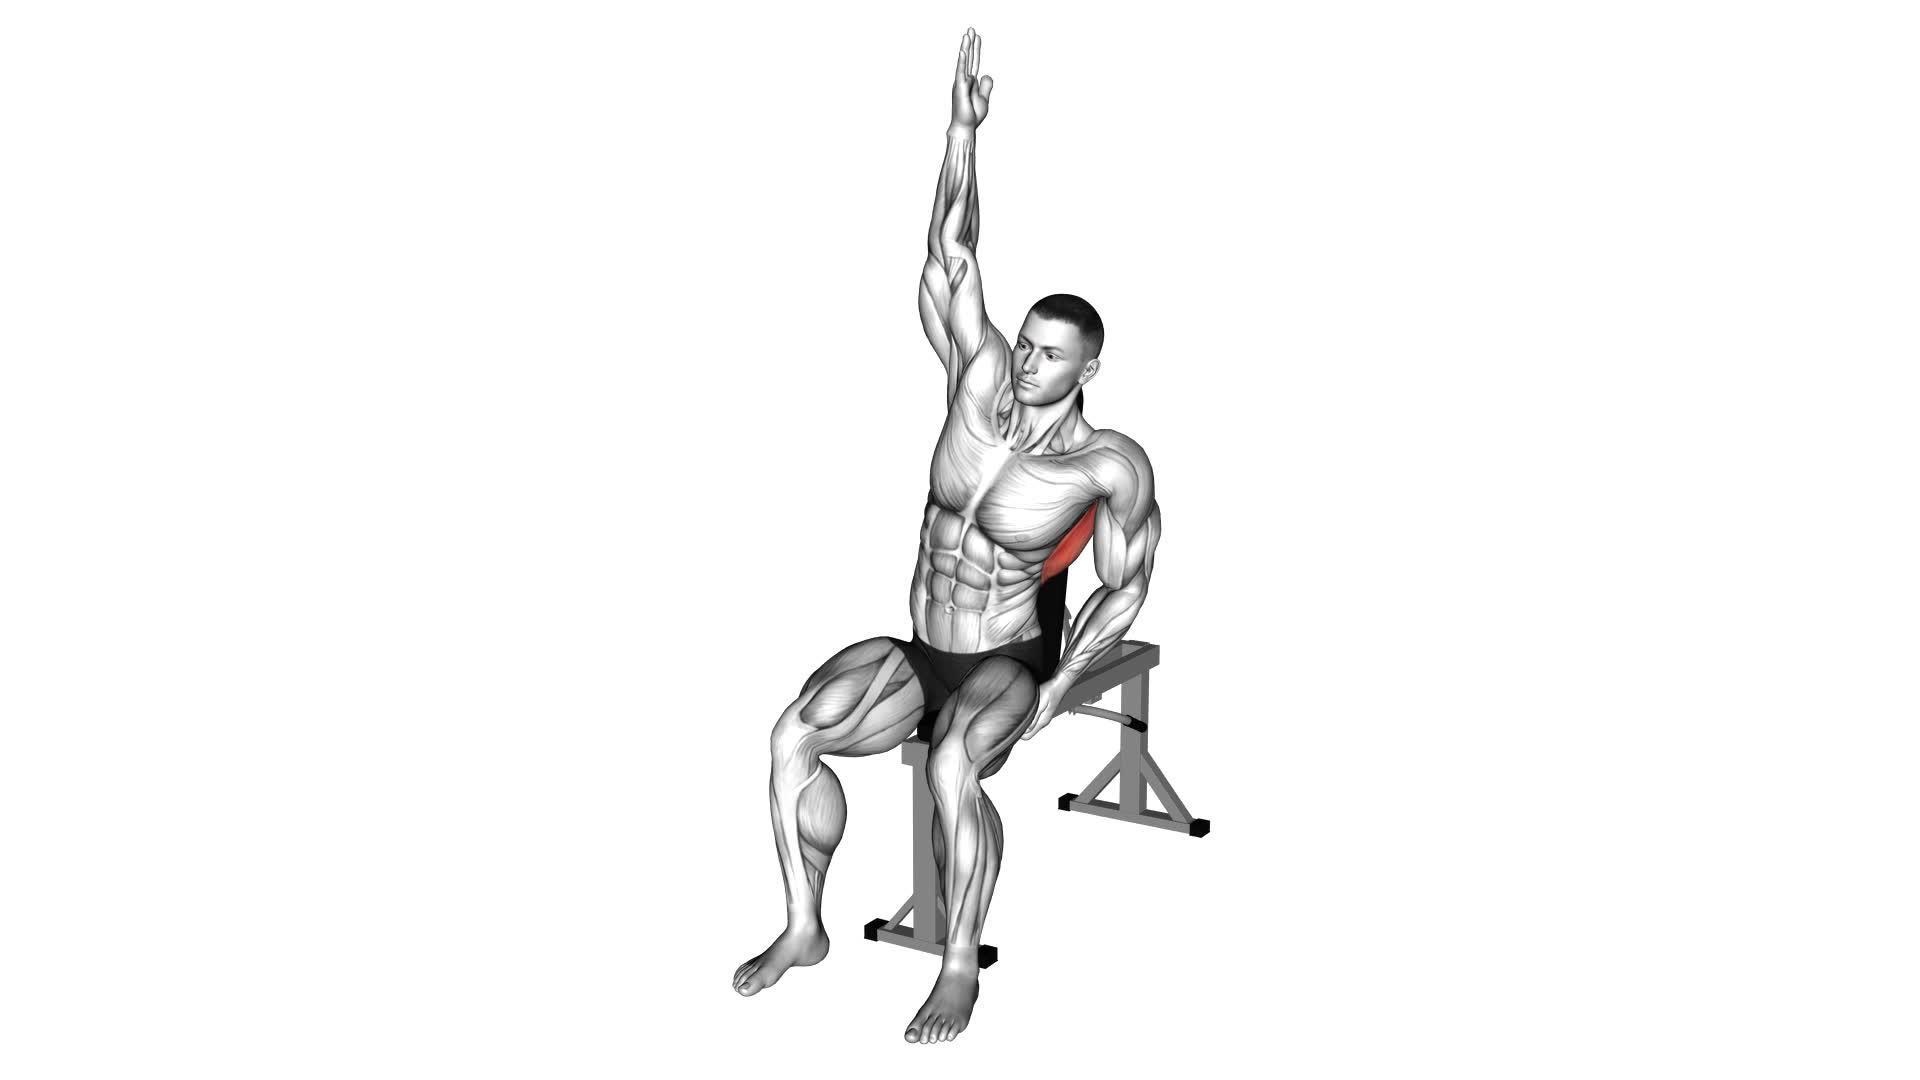 Seated Lower Back Stretch - Video Exercise Guide & Tips